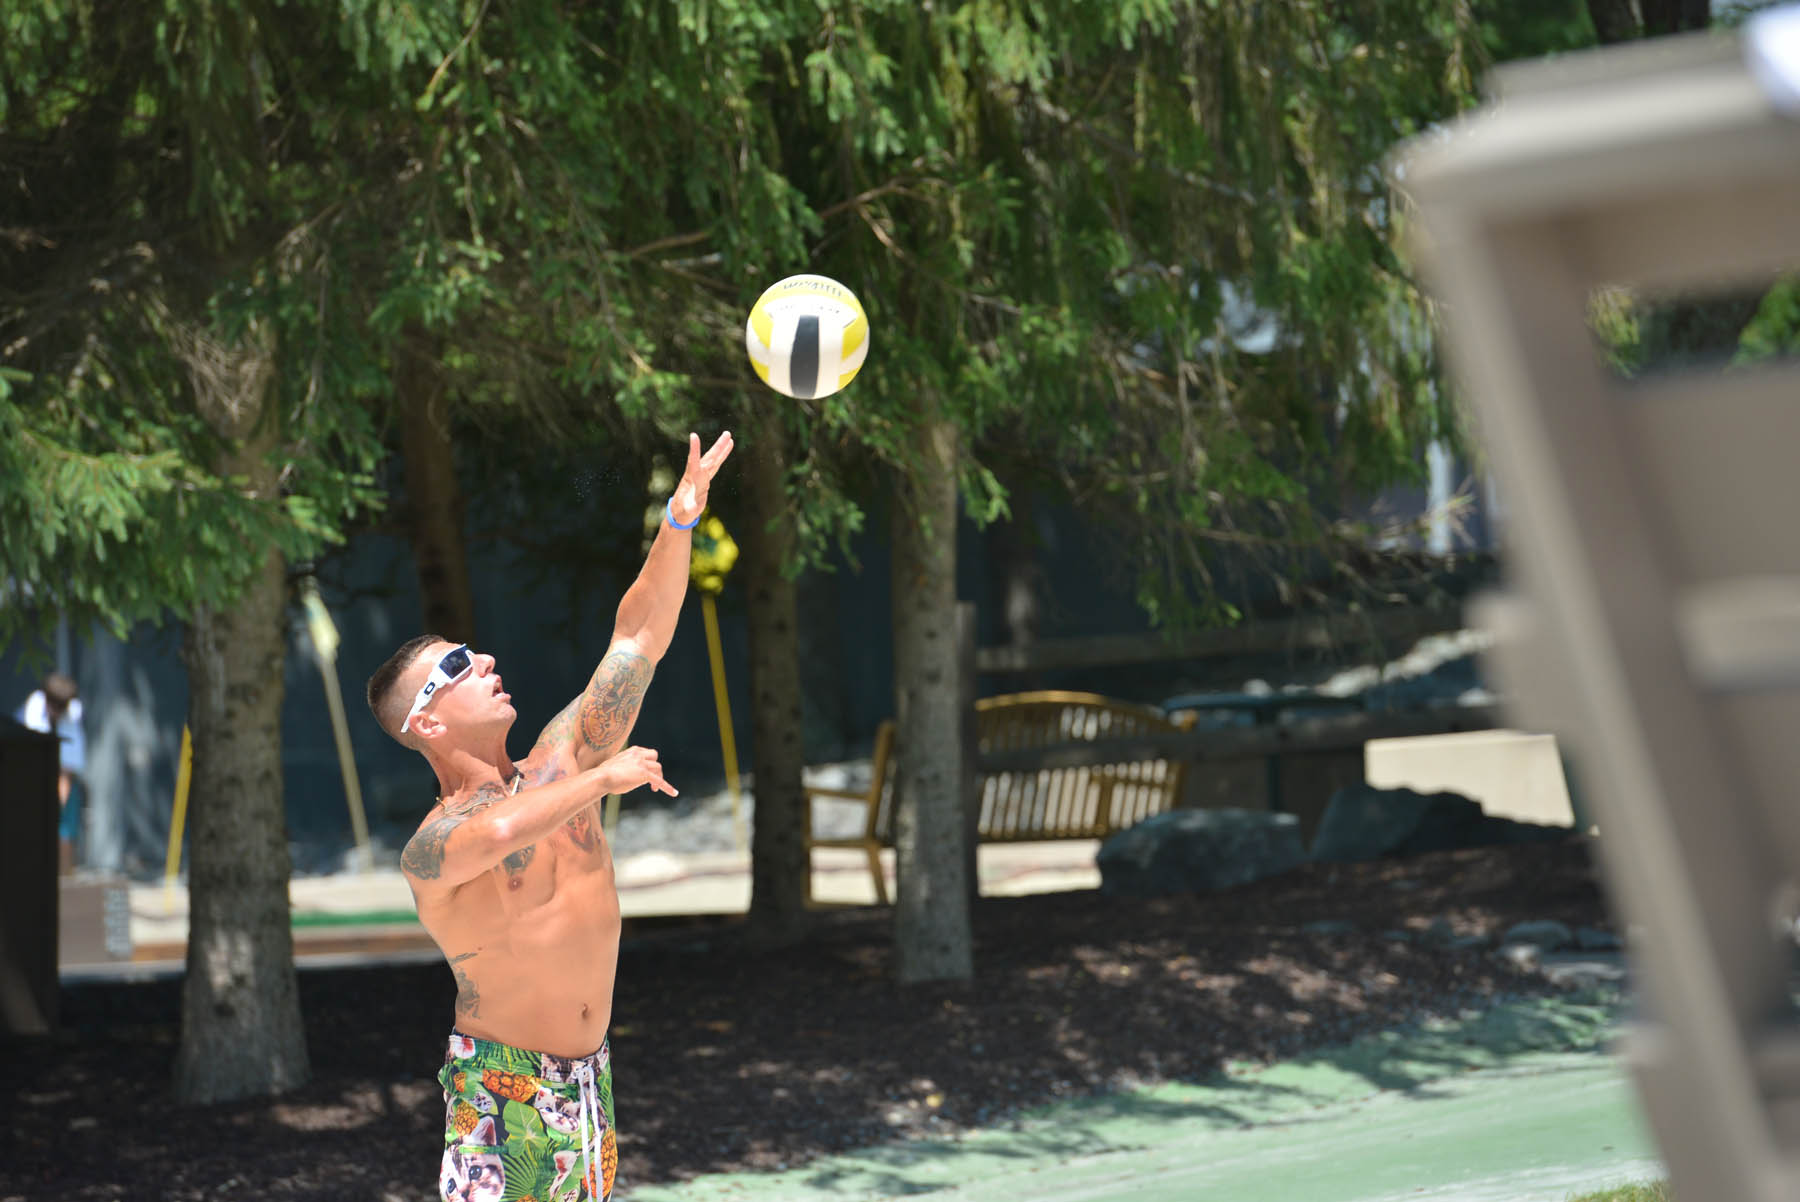 Man serving a volleyball outdoors.